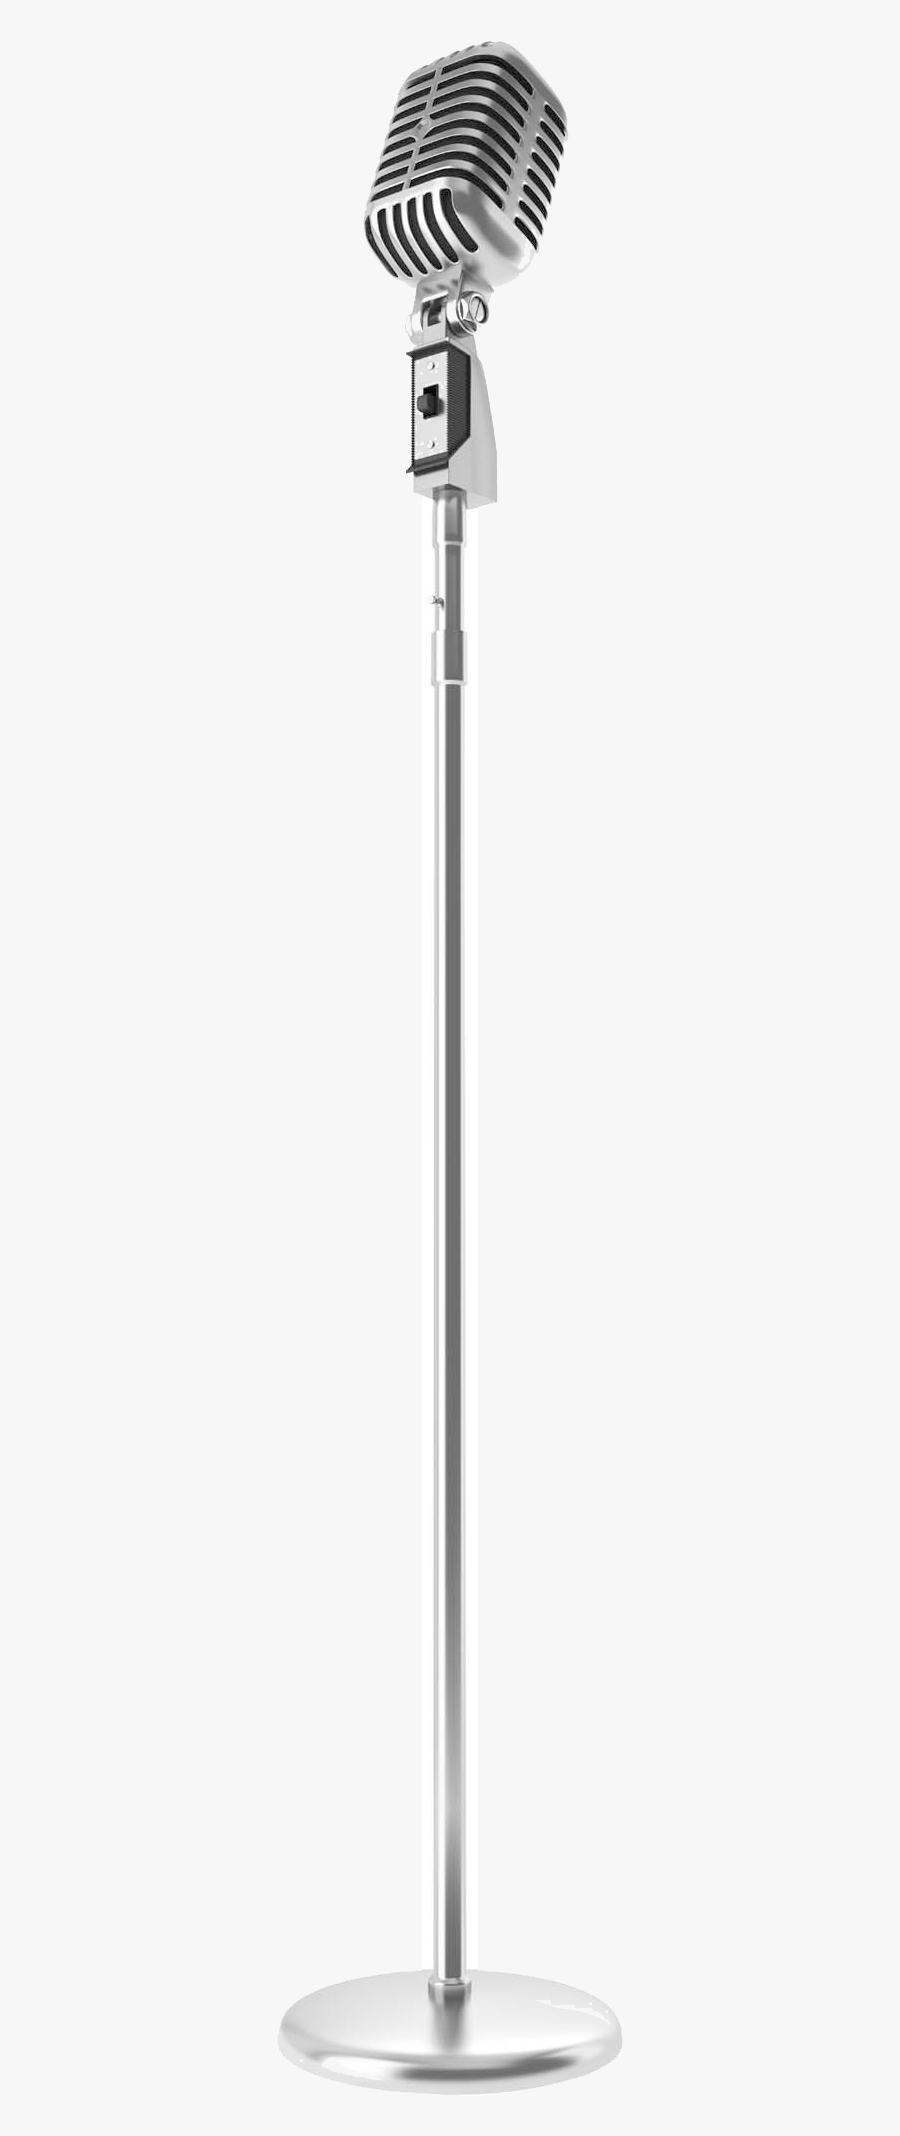 Mic On Stand Png - Microphone Stand Transparent Background, Transparent Clipart